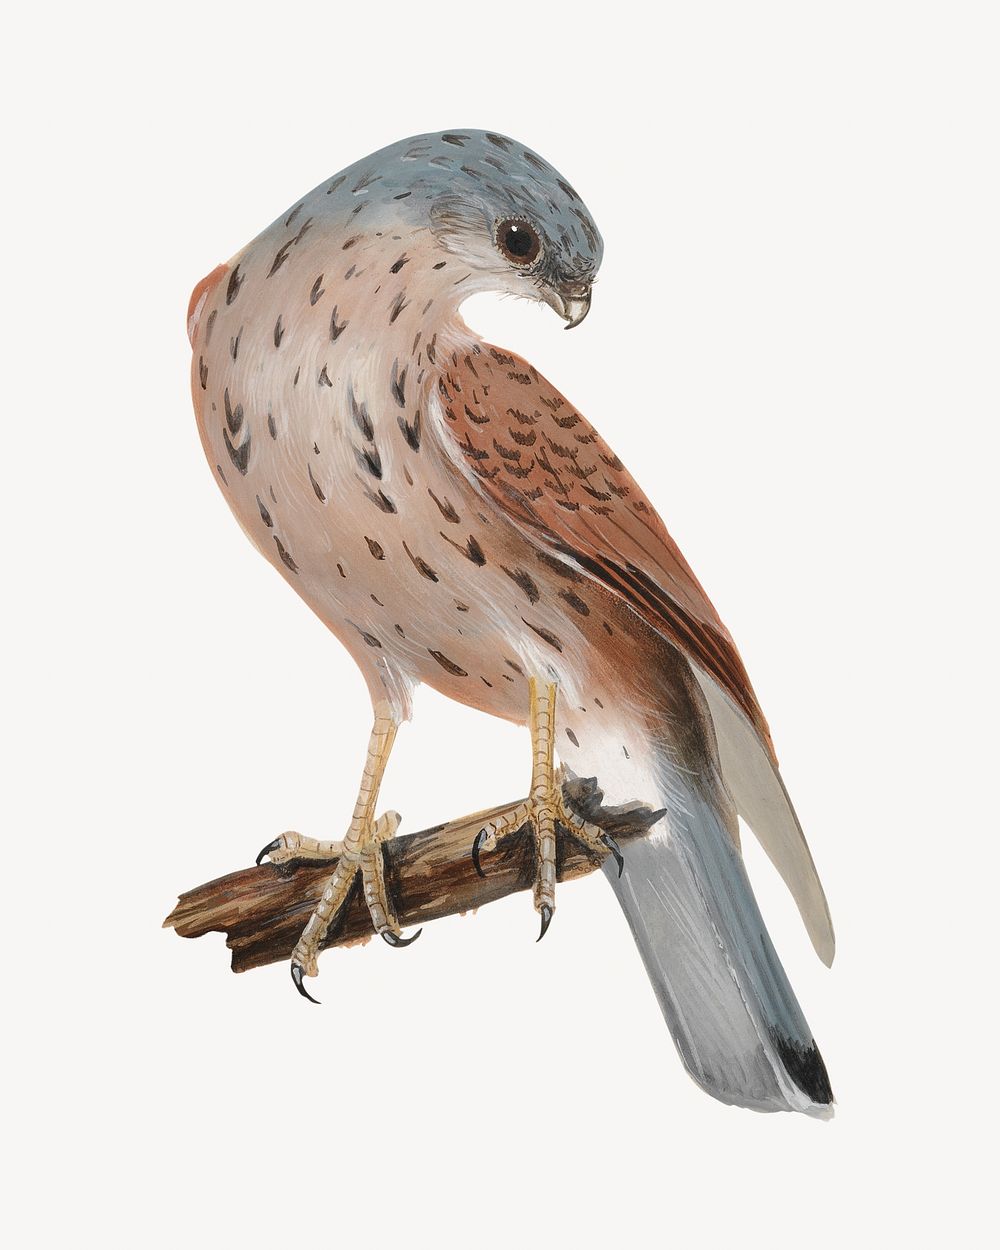 Falcon bird, vintage animal illustration by William Lewin. Remixed by rawpixel.